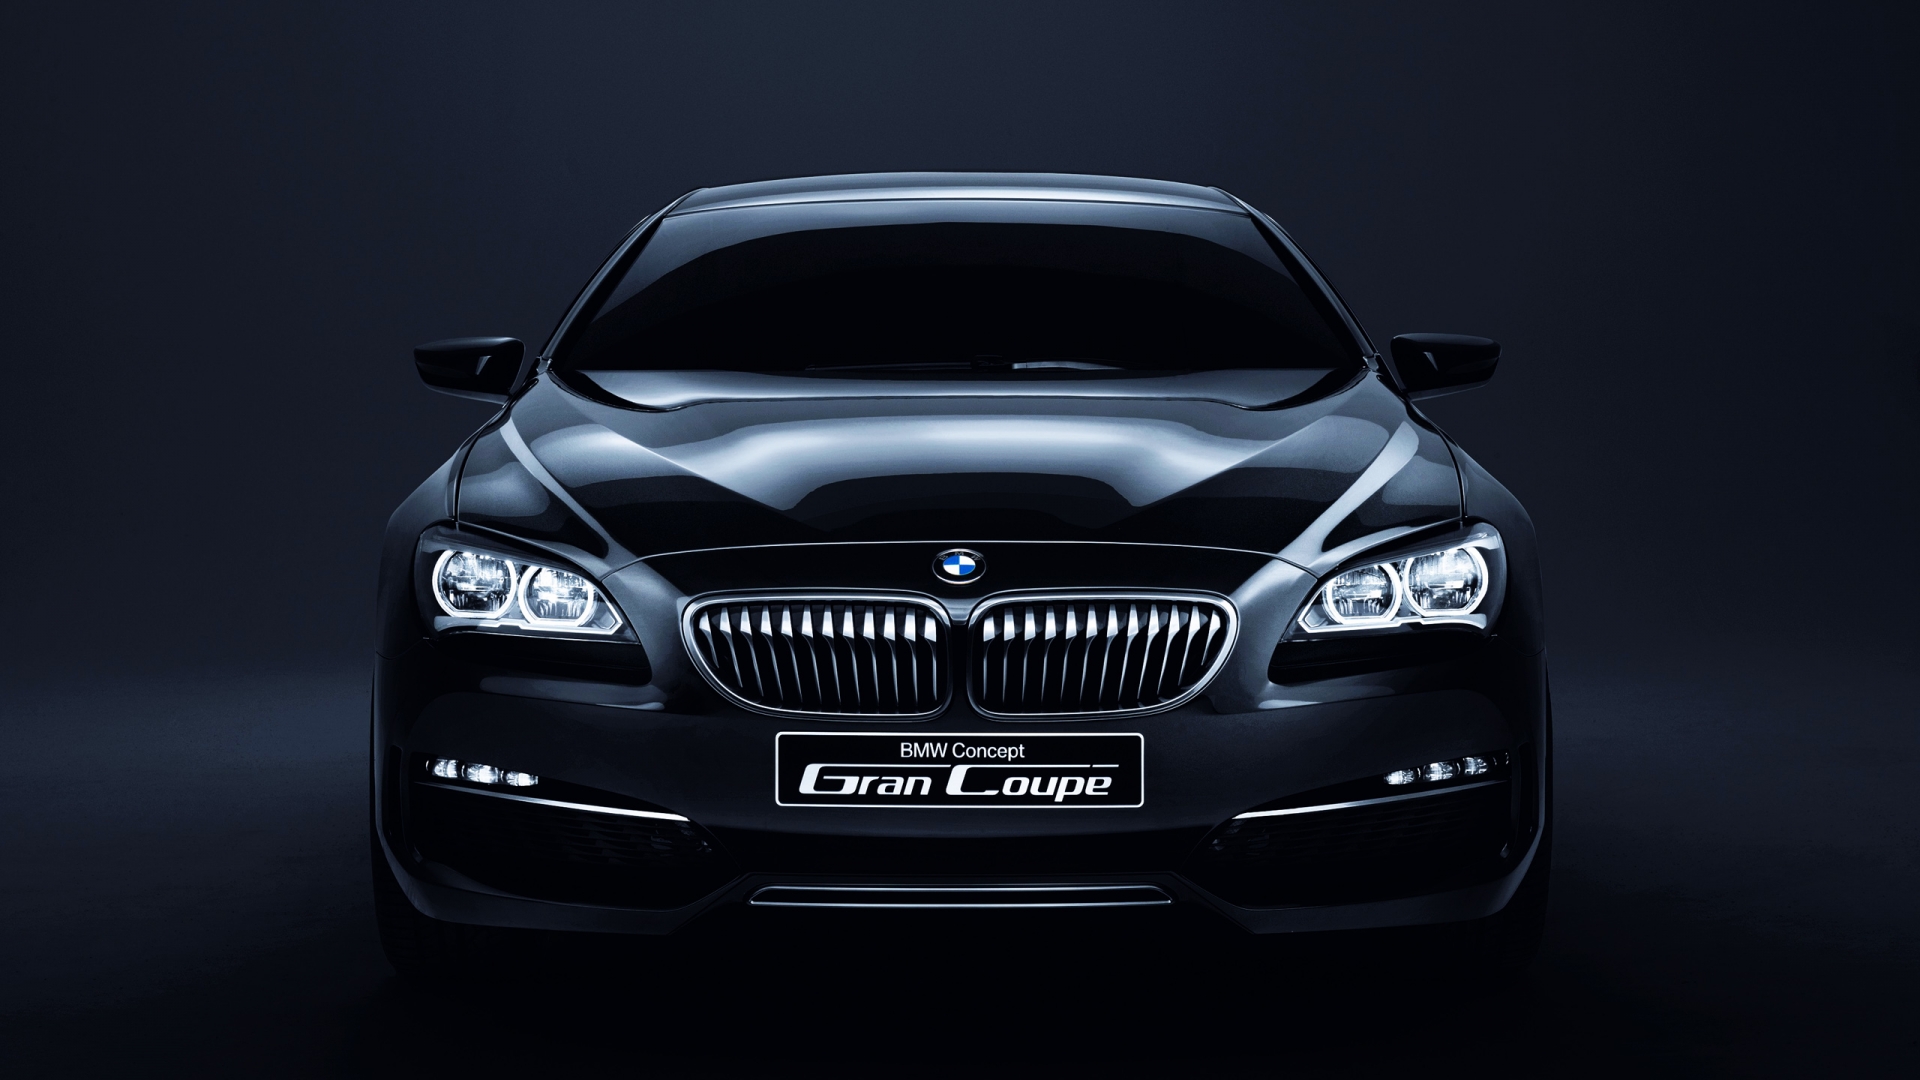 Images Of Bmw Car In Hd